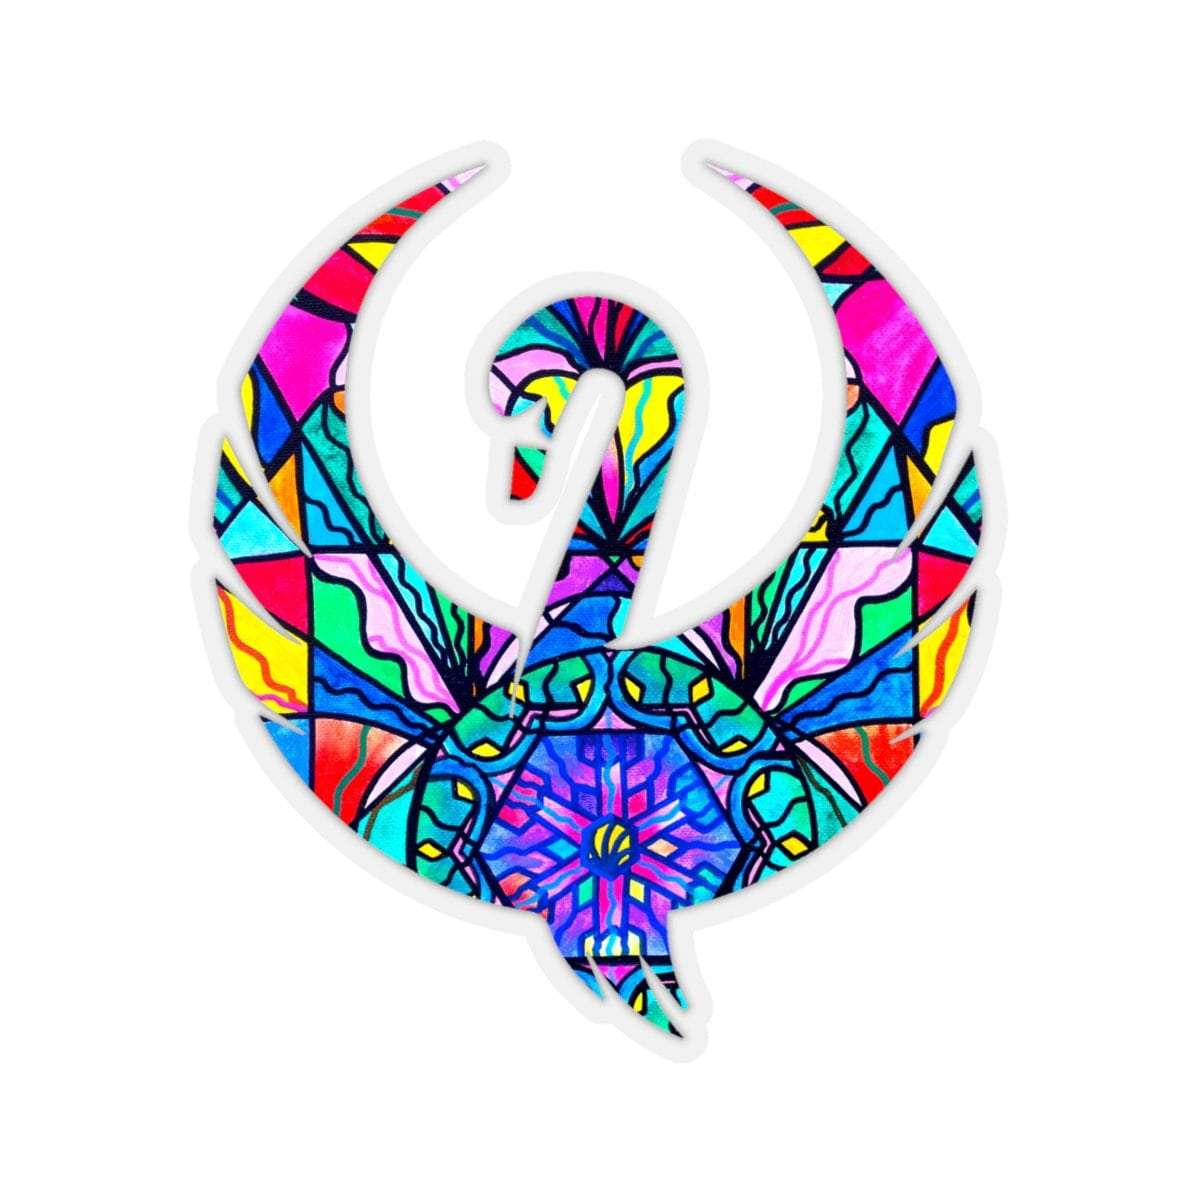 be-the-first-to-own-the-newest-anahata-heart-chakra-swan-stickers-supply_0.jpg